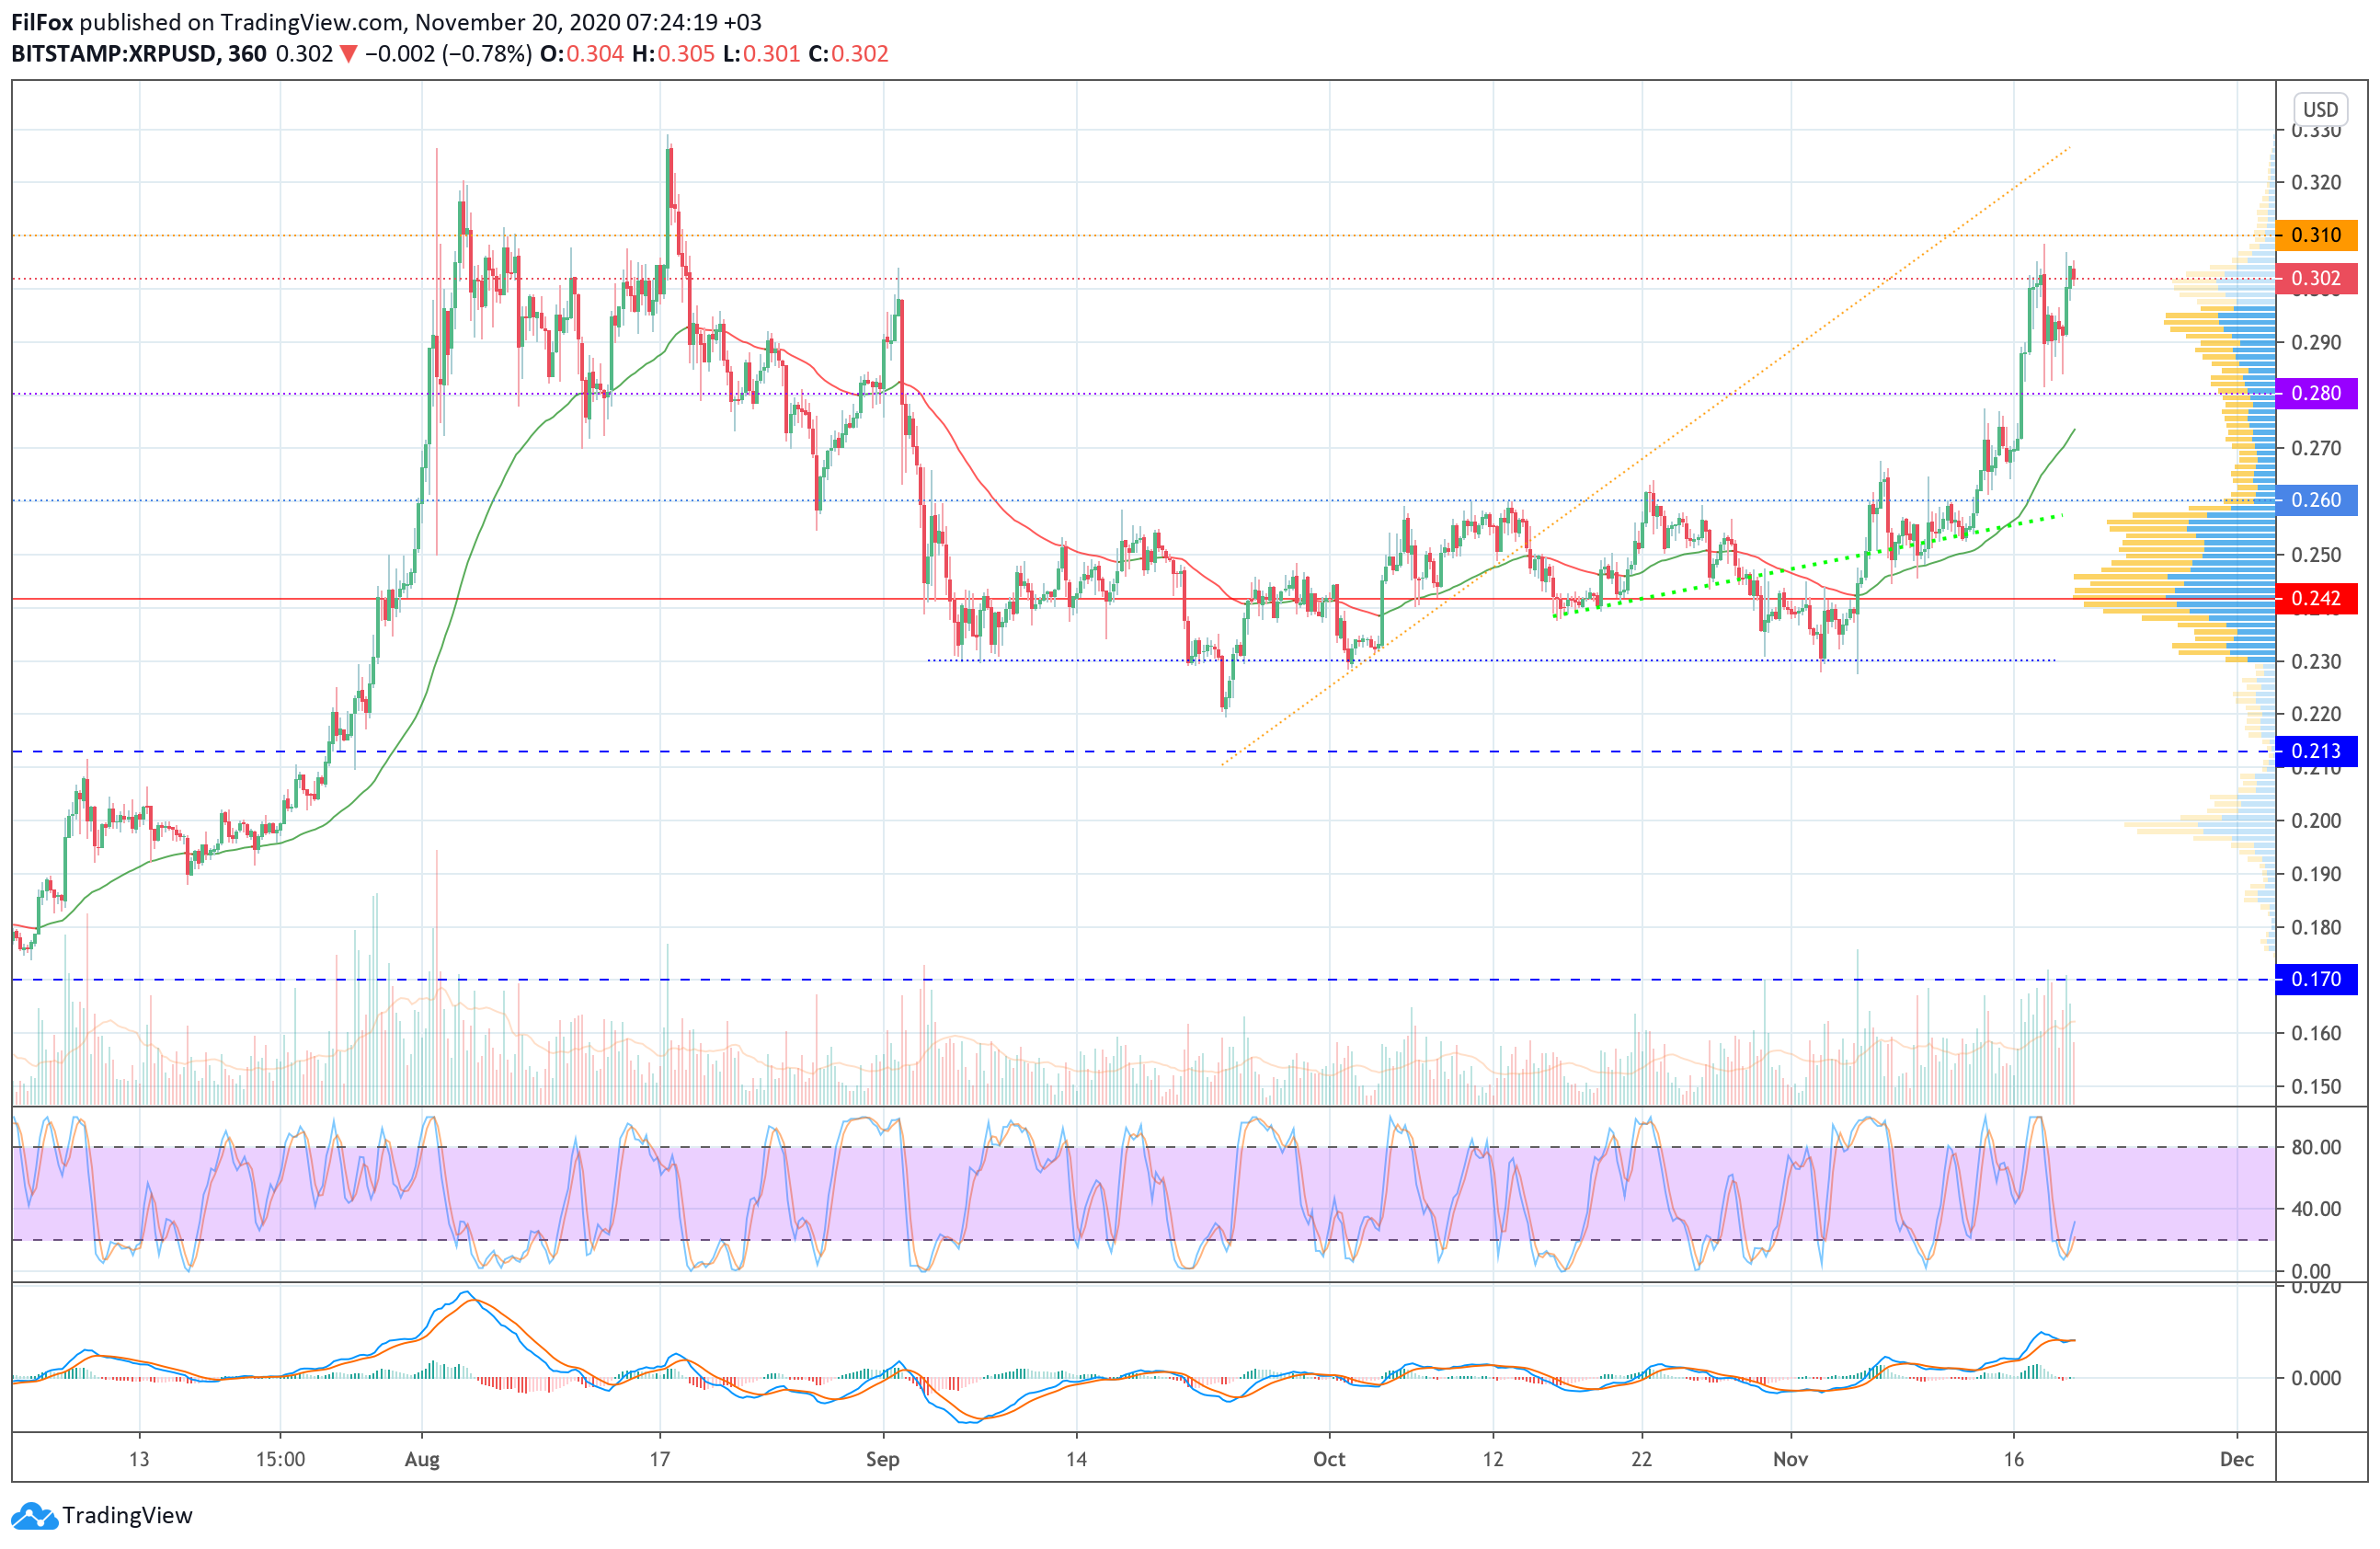 Analysis of the prices of Bitcoin, Ethereum, Ripple for 11/20/2020